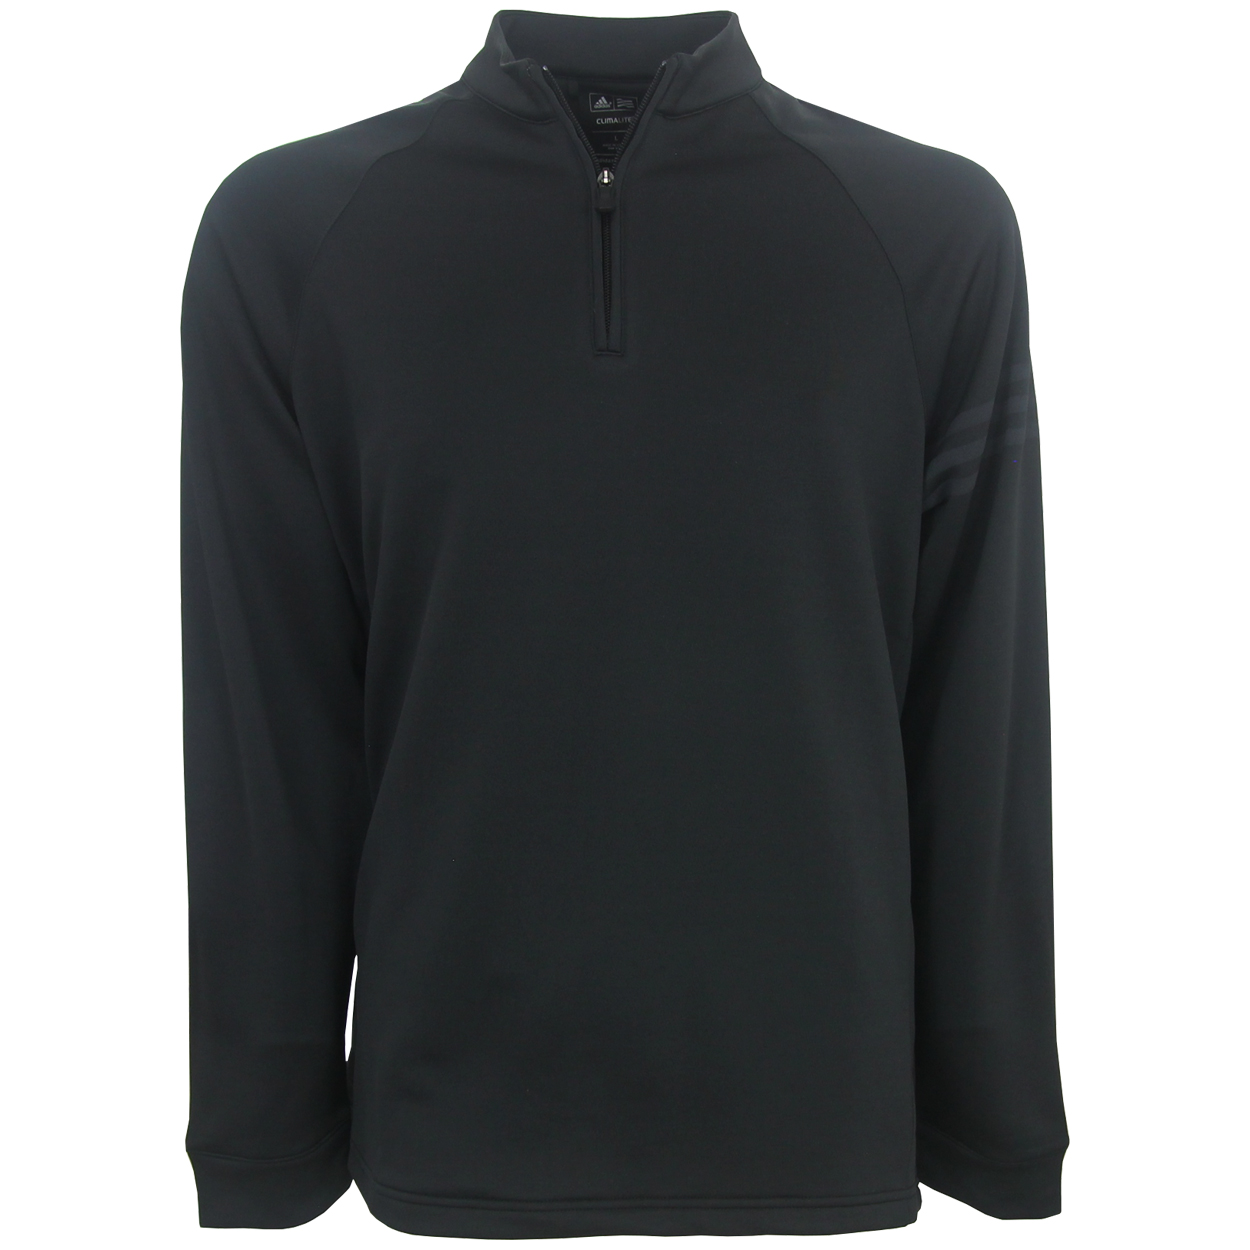 Adidas ClimaLite 1/4-Zip Performance Pullover - GolfEtail.com